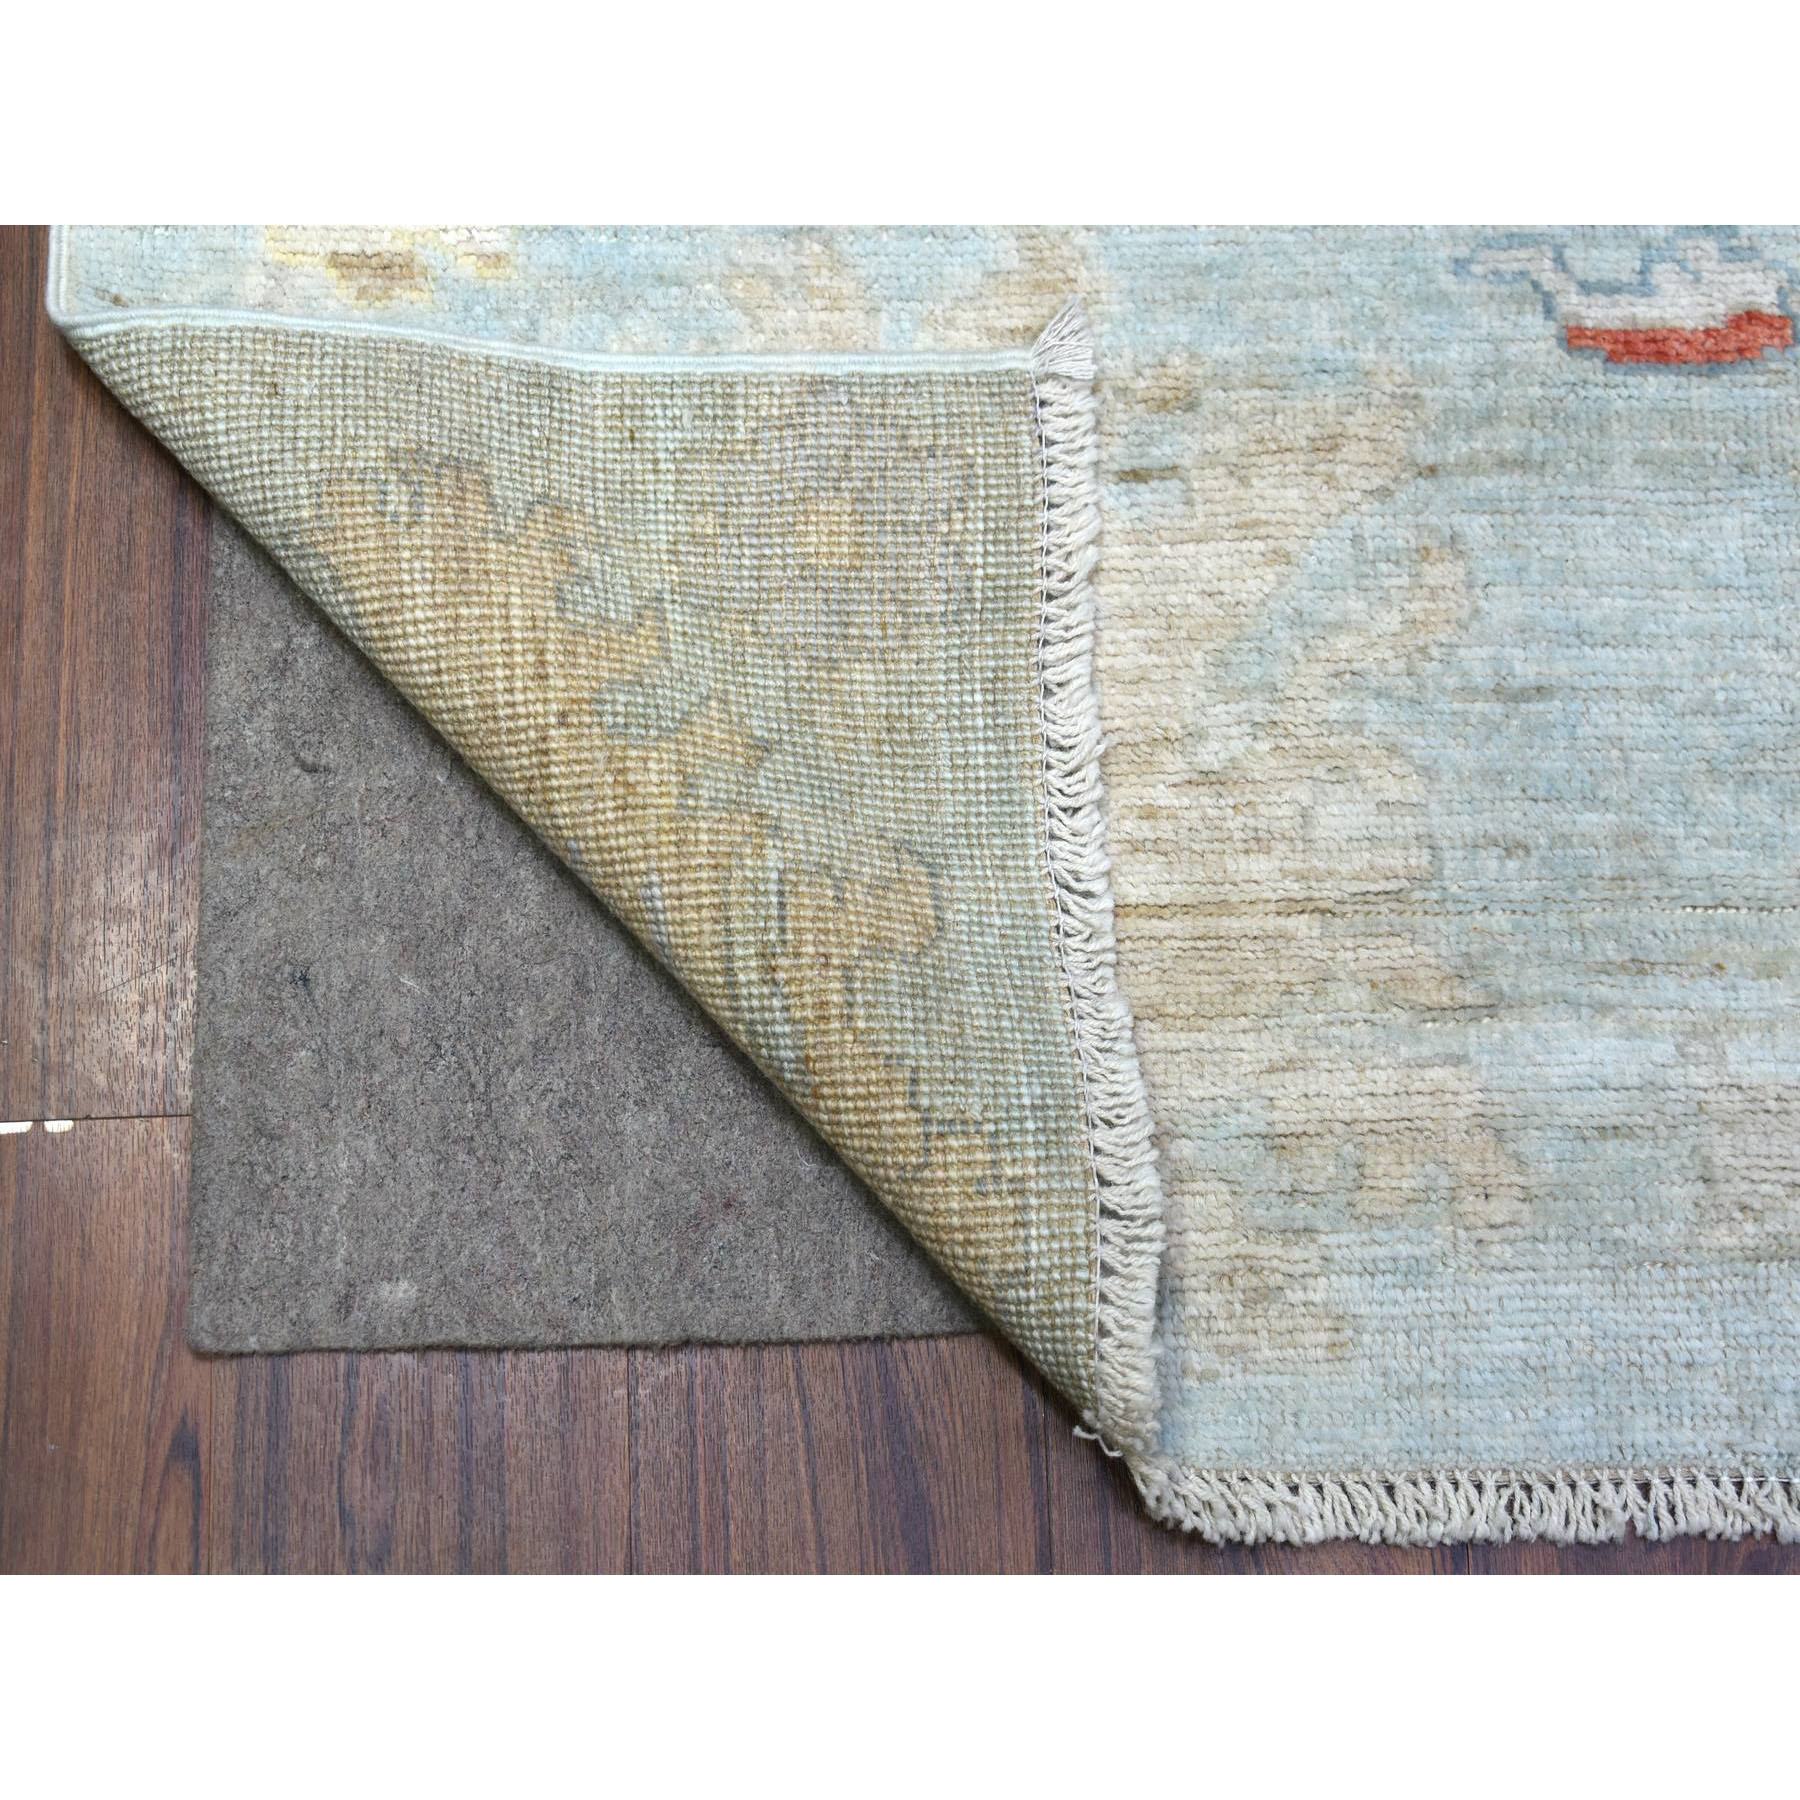 8'x9'9" Hand Woven Faded Blue Pure Wool Afghan Angora Ushak with All Over Leaf Design Oriental Rug 